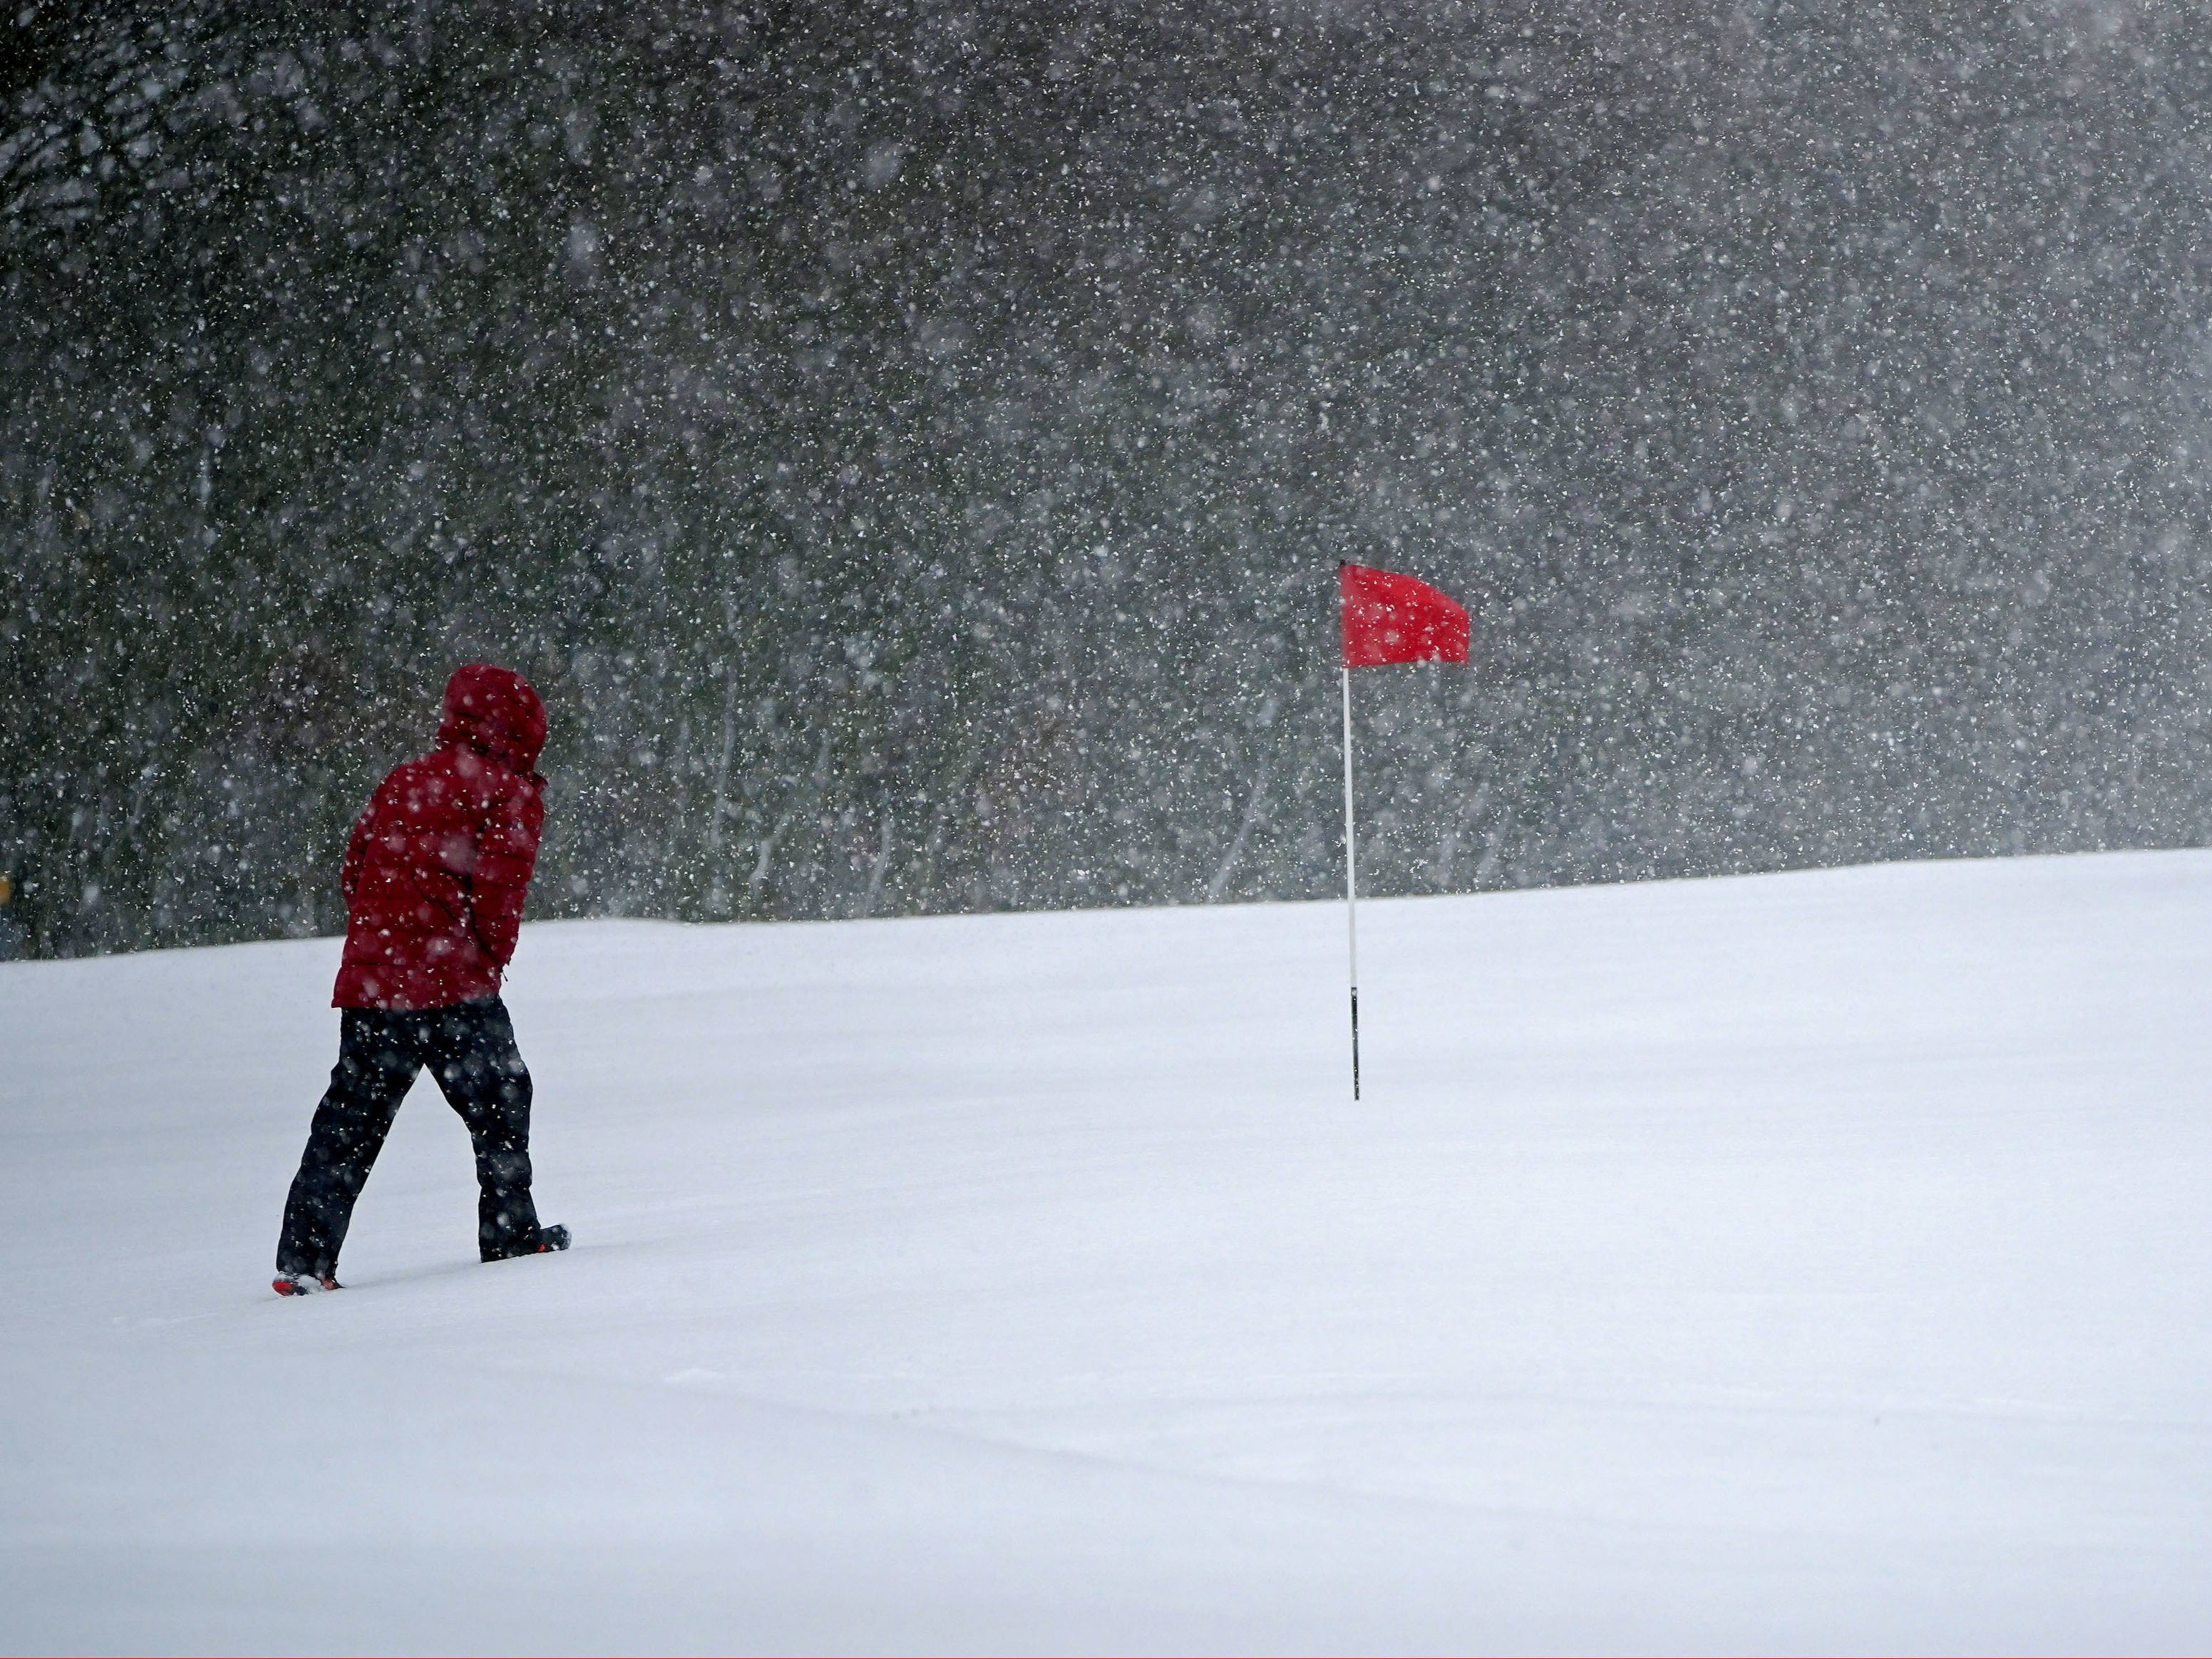 Snow falls at the Saddleworth Moor golf course in Uppermill near Oldham